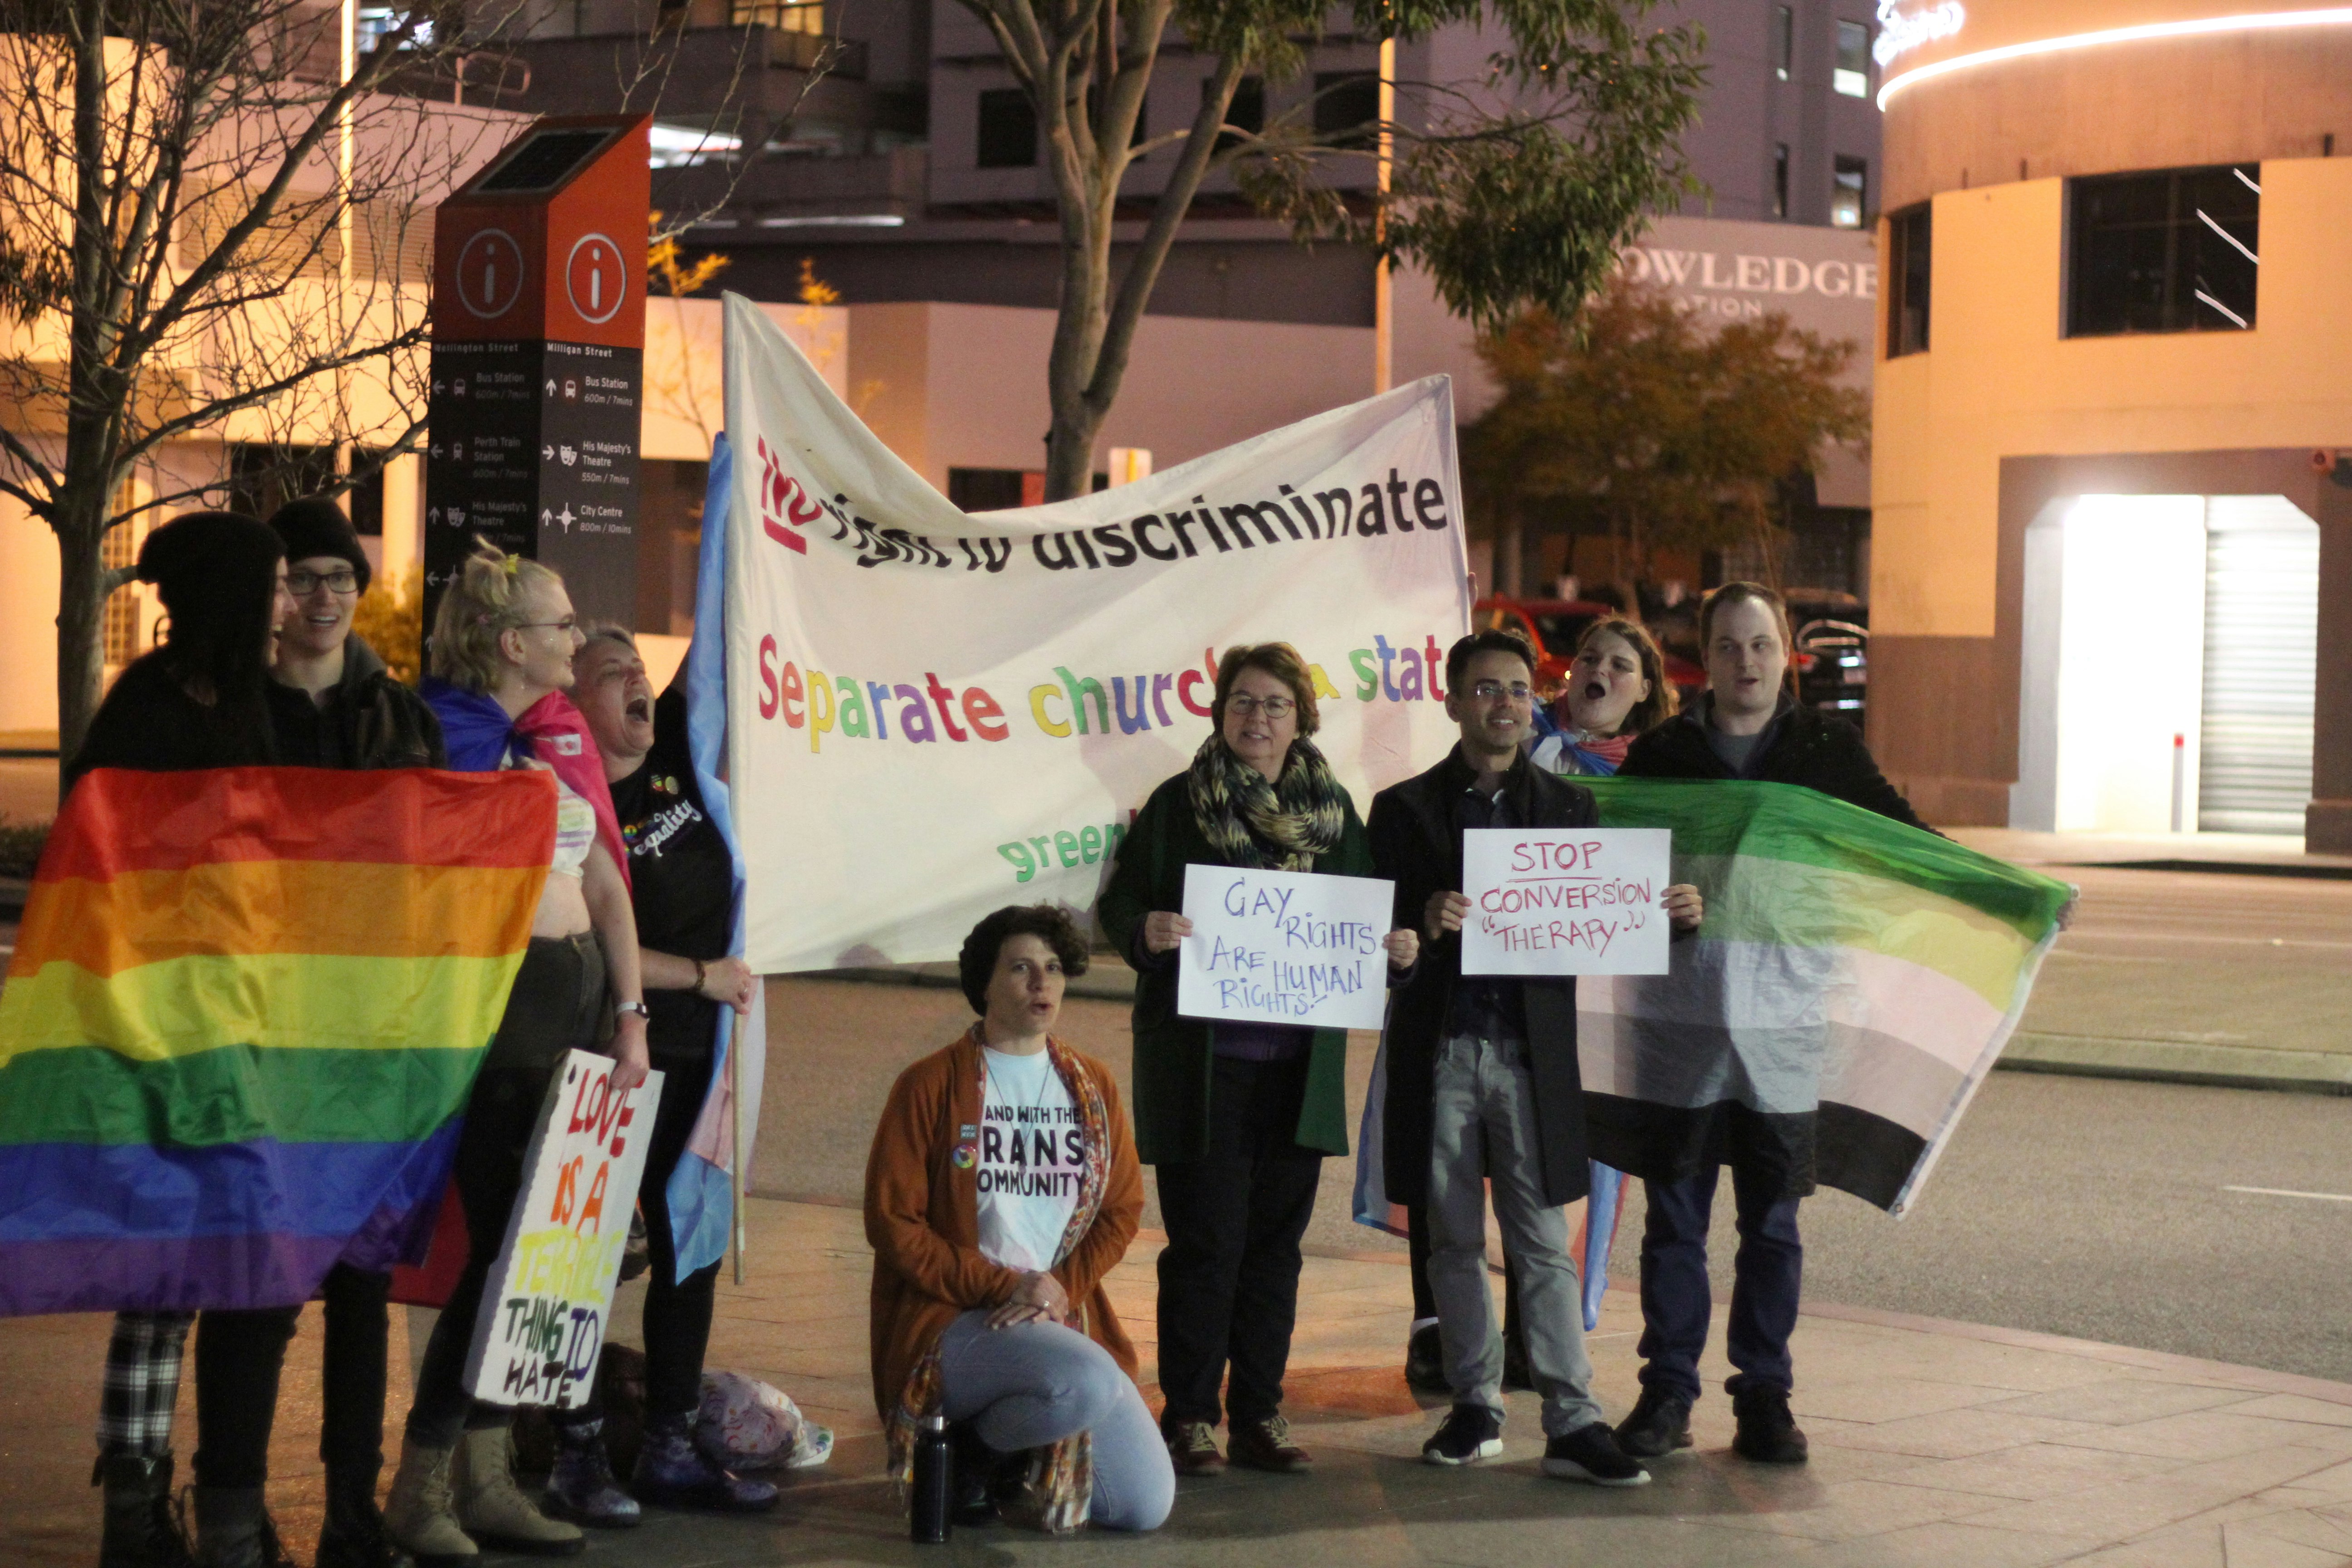 LGBTIQA+ rights activists protest queer conversion practices/therapy. Perth.